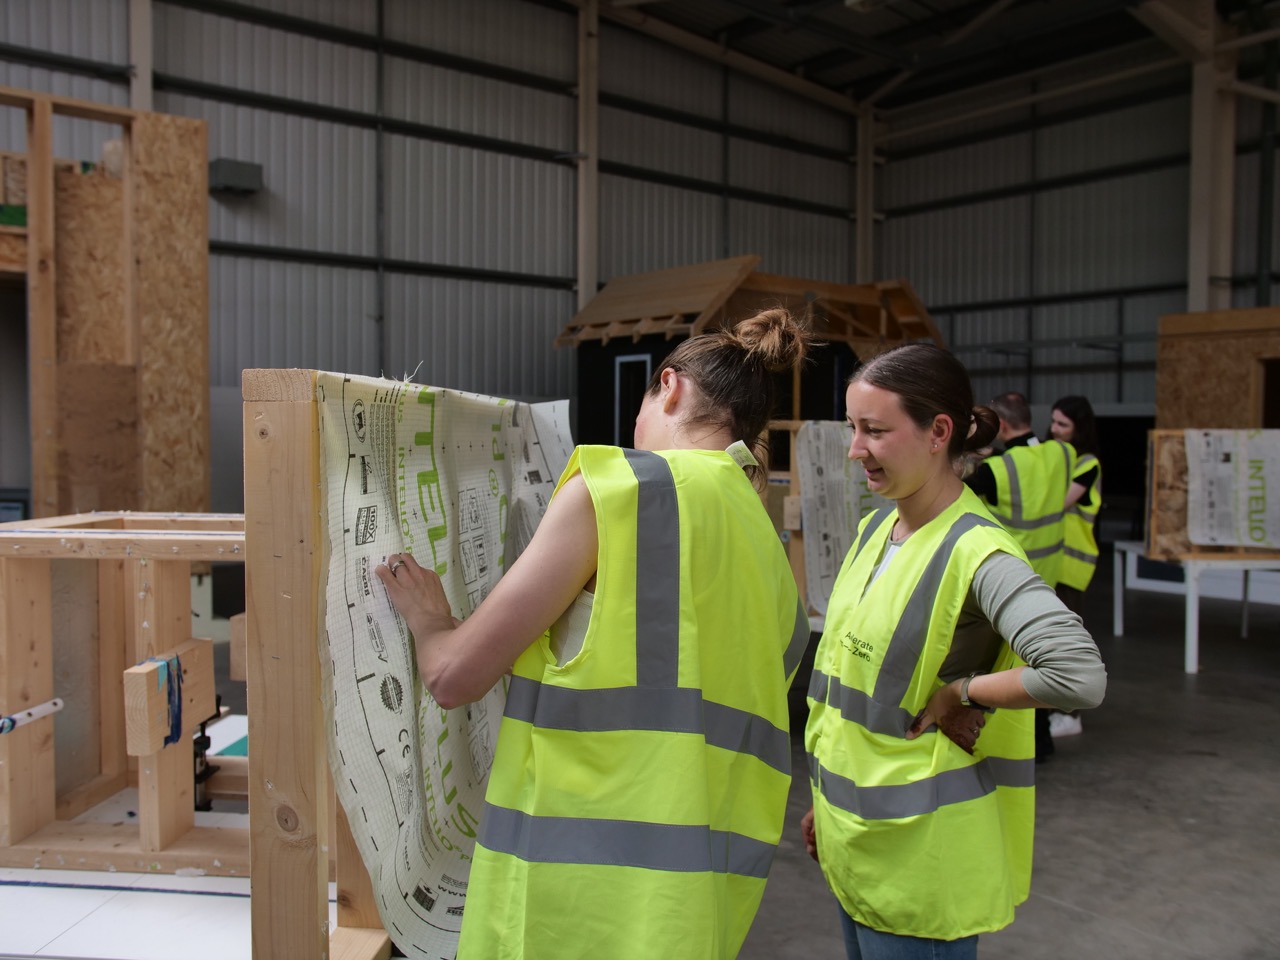 BE-ST and Coaction training to help sector put Passivhaus standards into practice